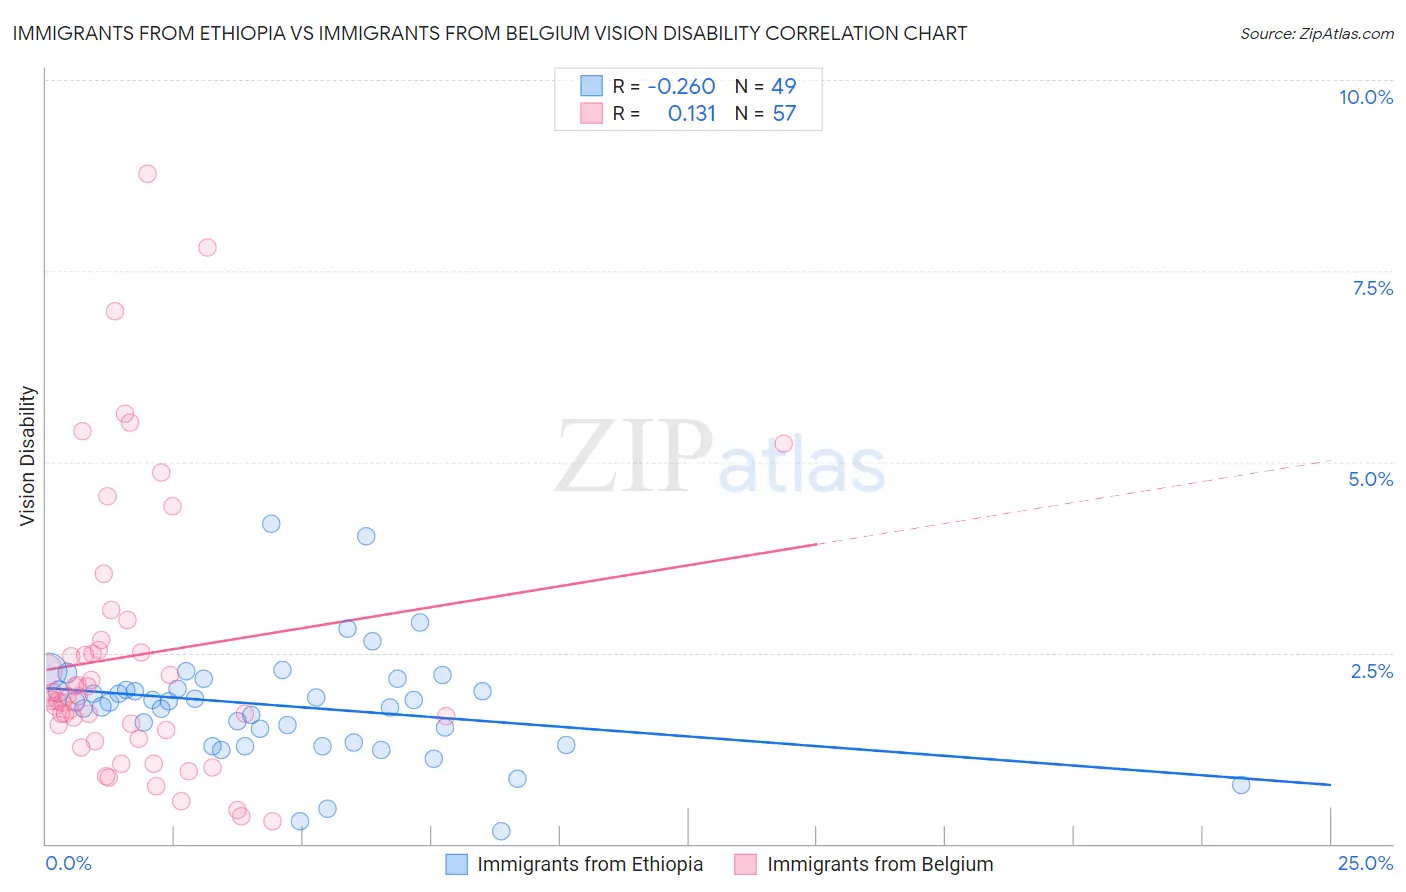 Immigrants from Ethiopia vs Immigrants from Belgium Vision Disability